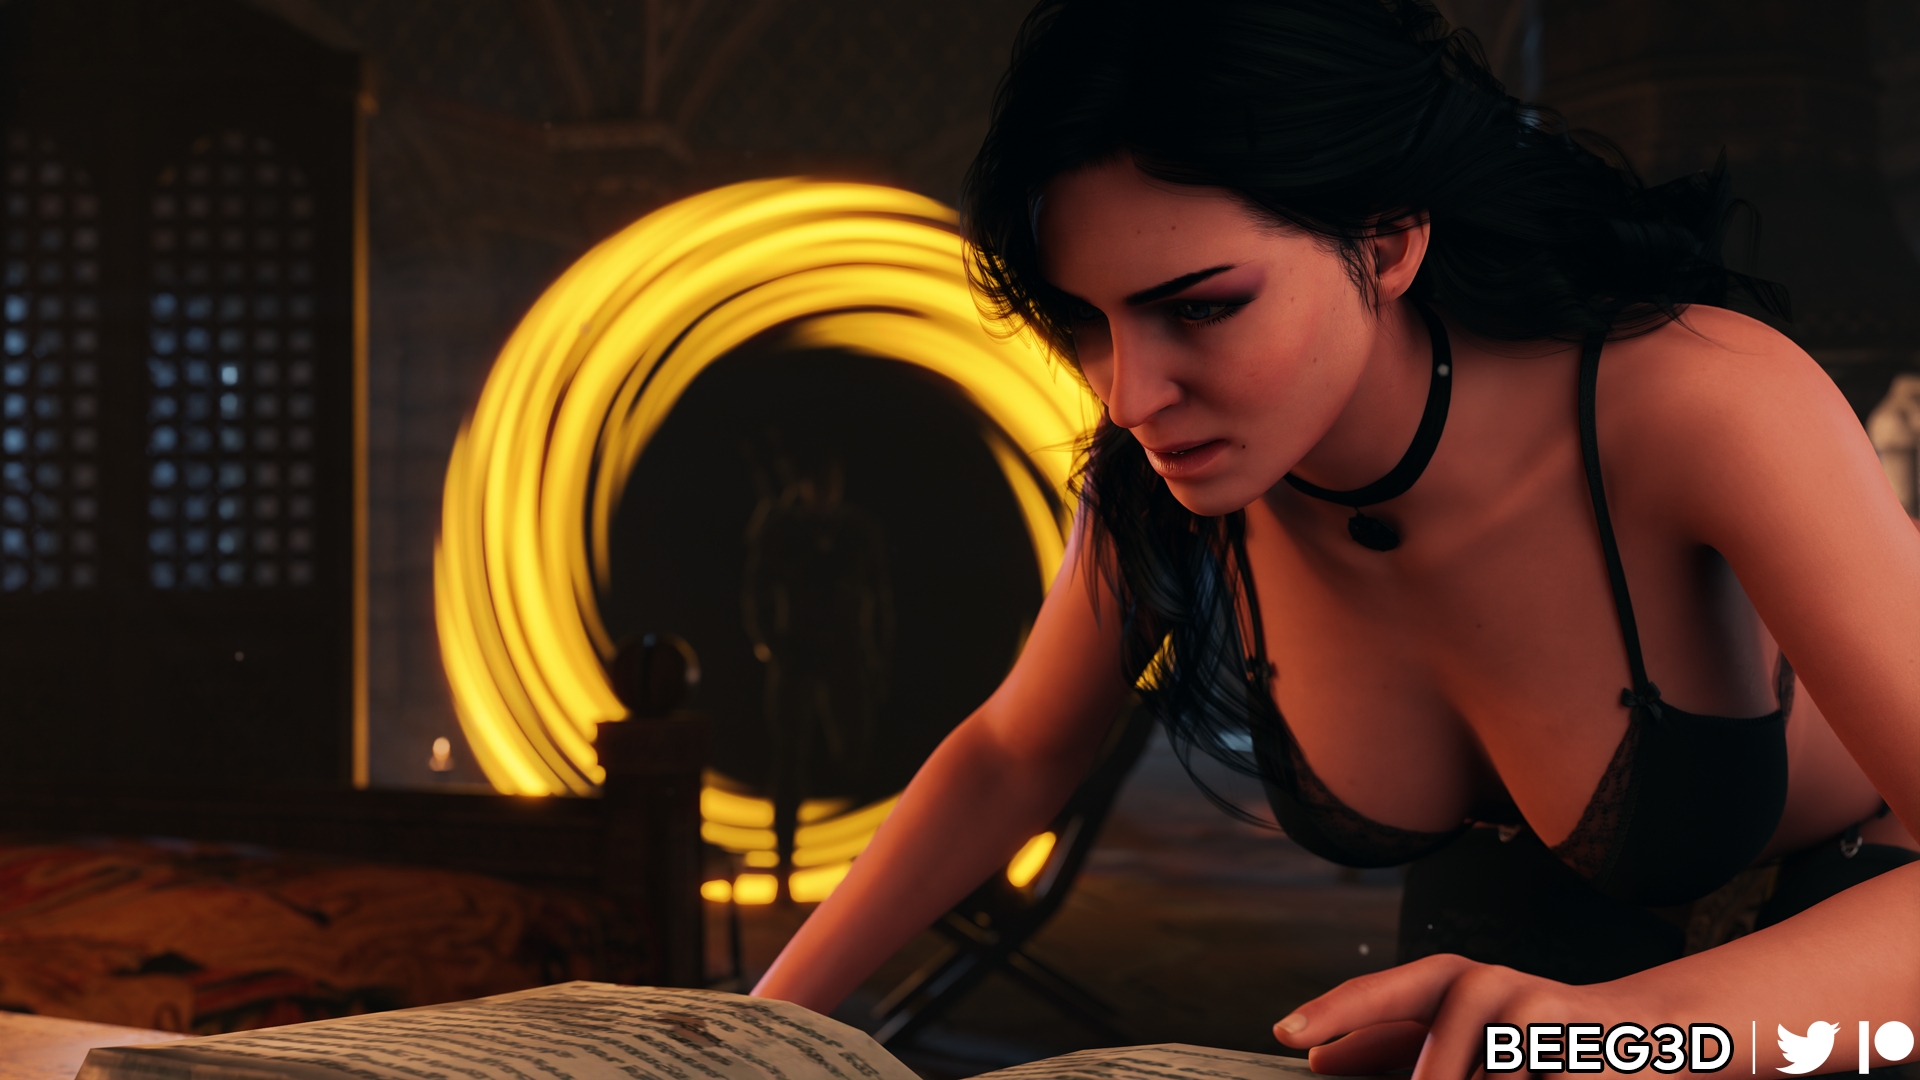 Yennefer - Fertility Testing Yennefer di Vengerberg Yennefer (witcher) The Witcher The Witcher 3 Blowjob Interracial Pregnant Missionary Standing 9